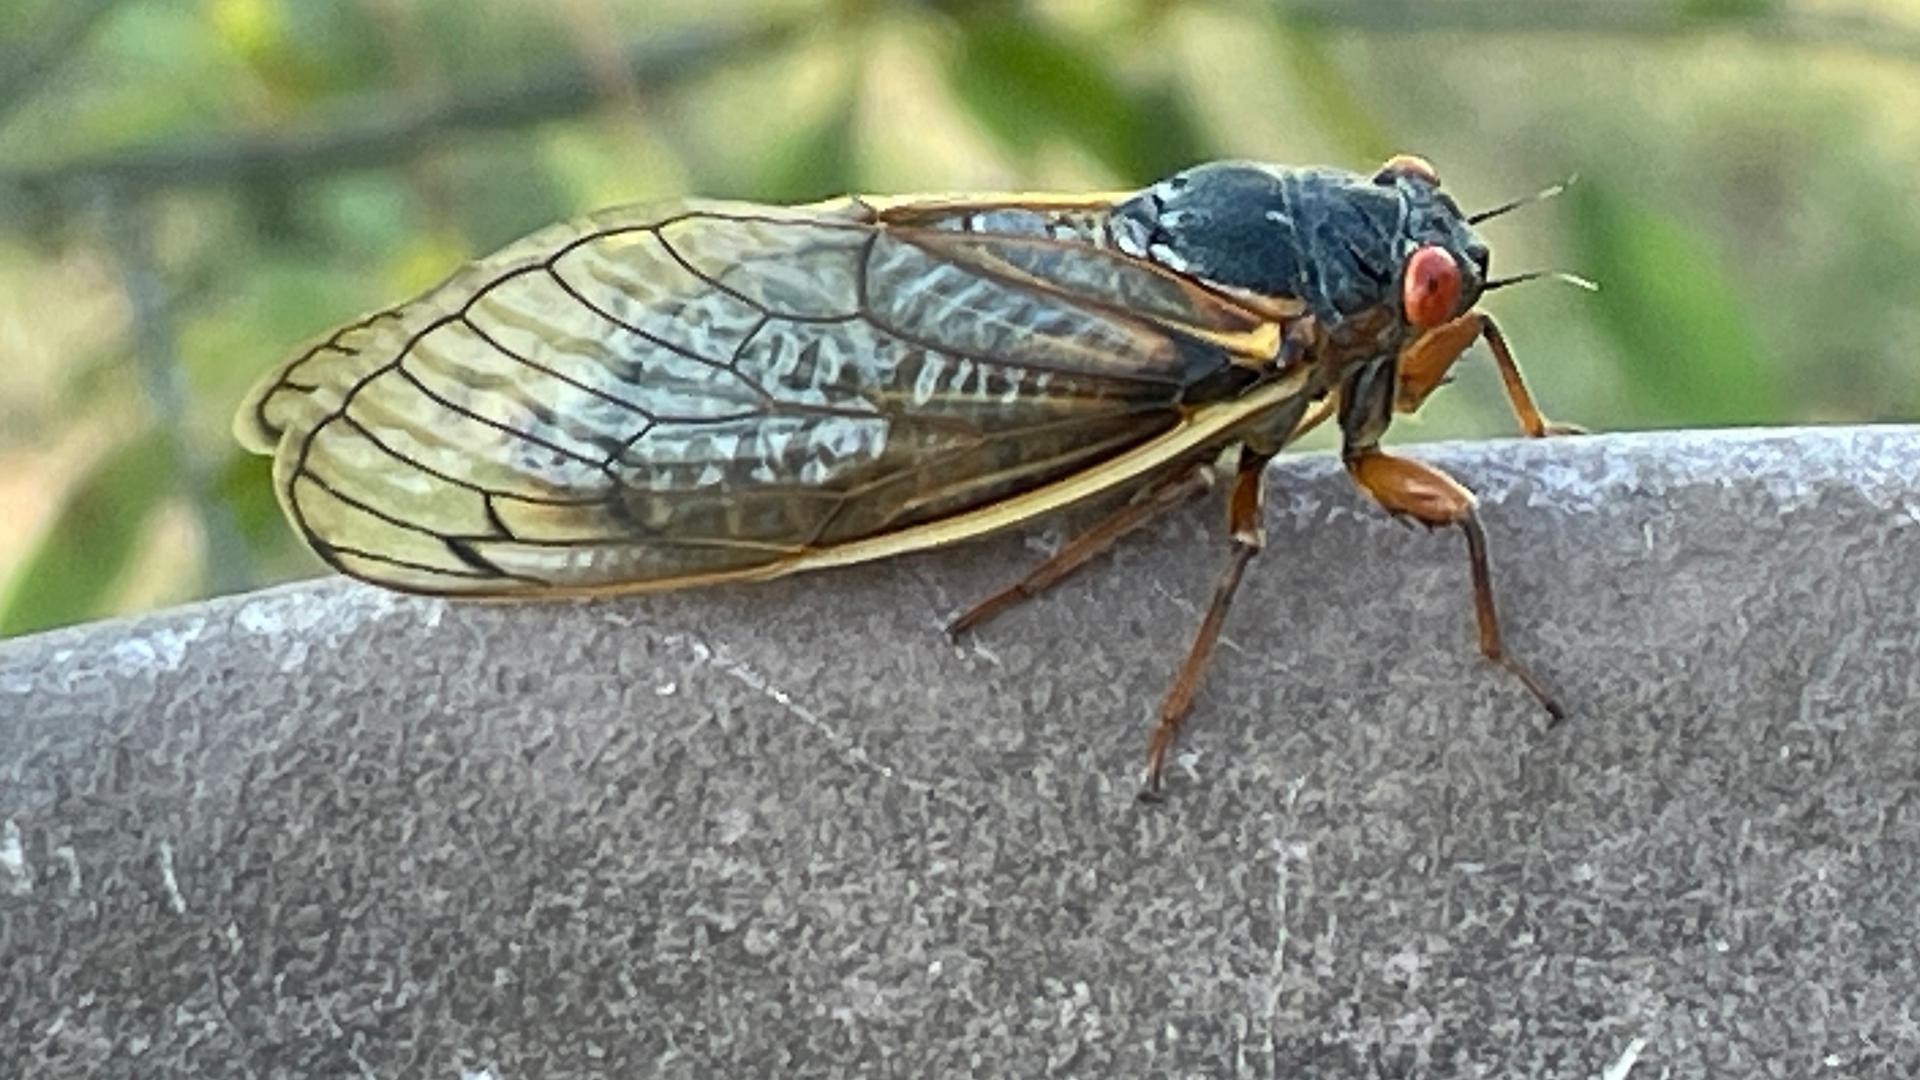 How to protect your yard, garden as cicada broods emerge cbs19.tv